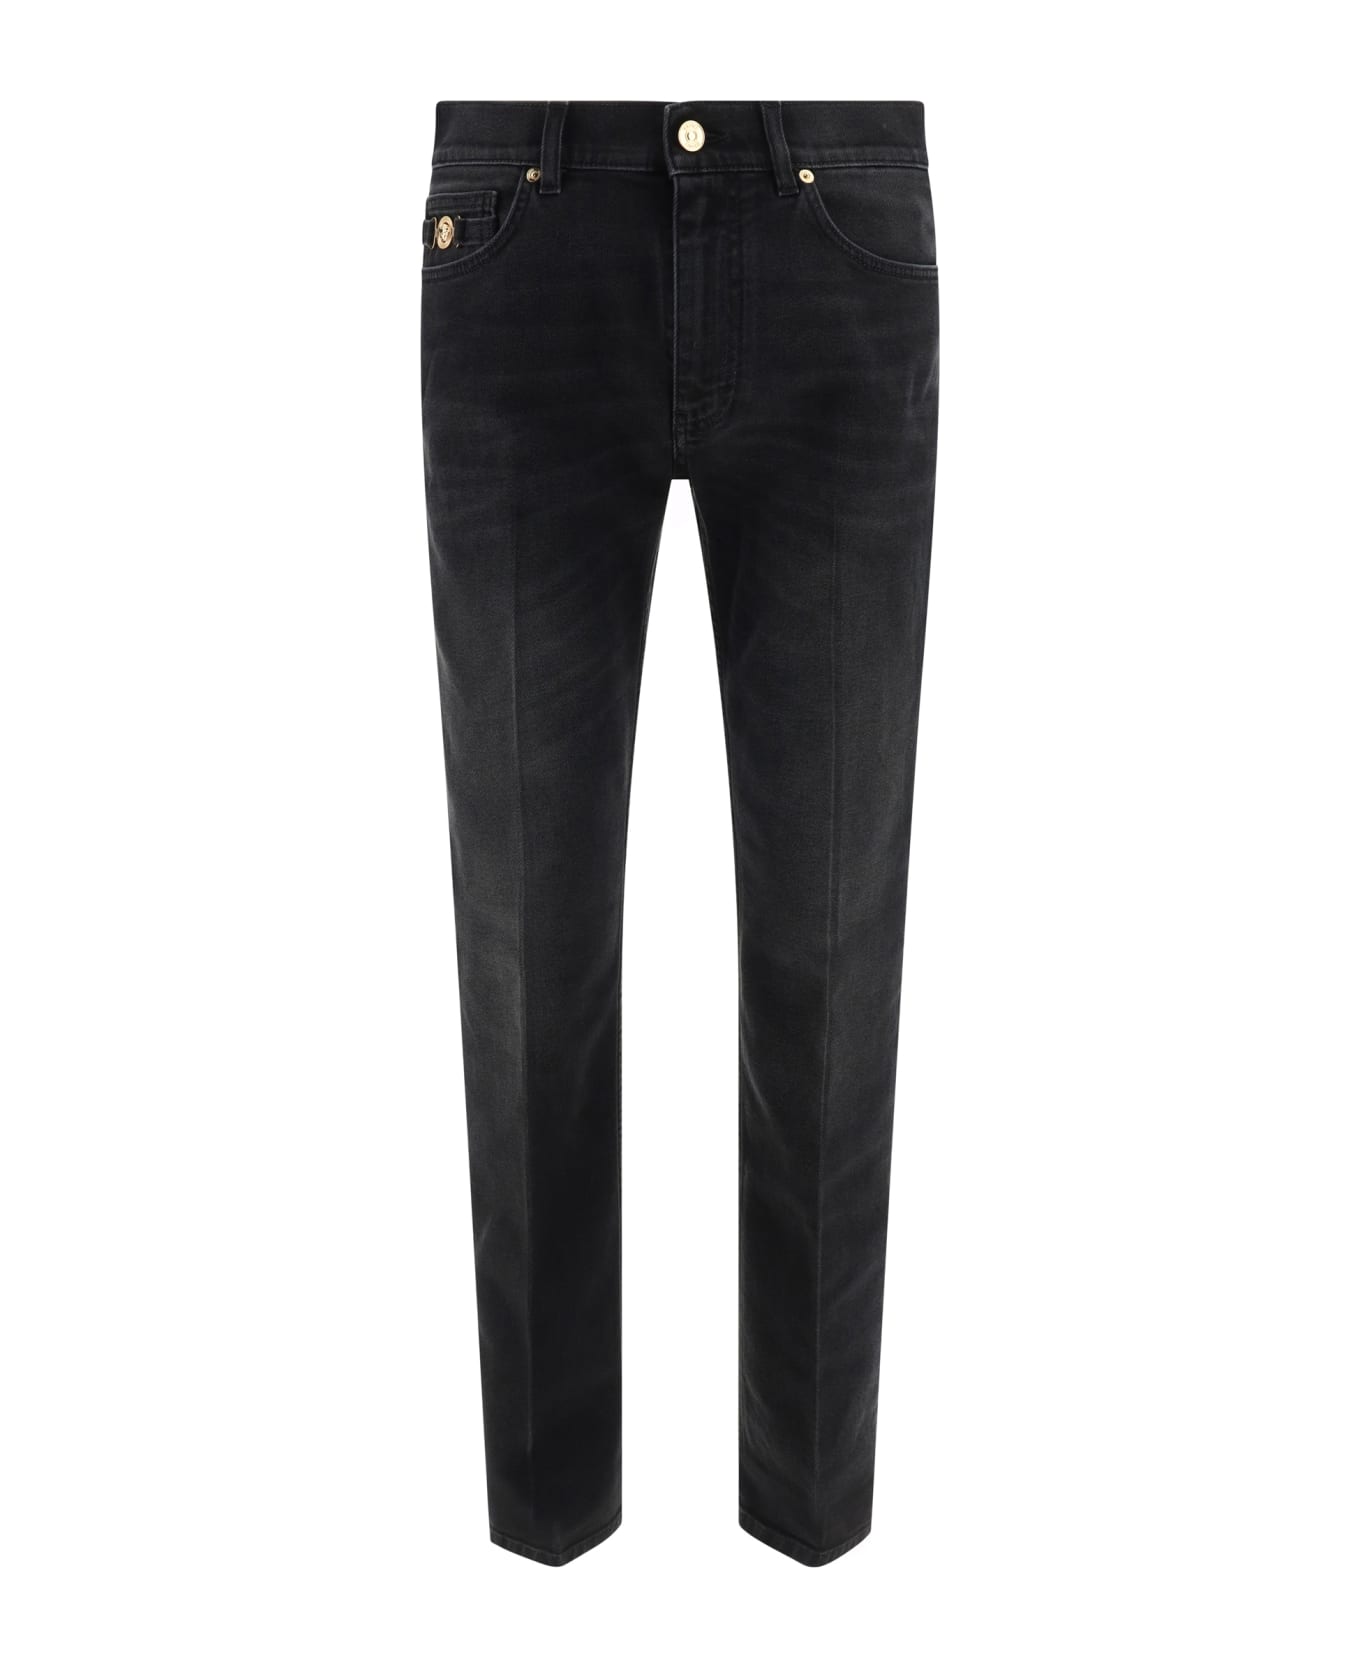 Versace Stretch Denim Slim Fit Jeans - Faded Washed Black ボトムス